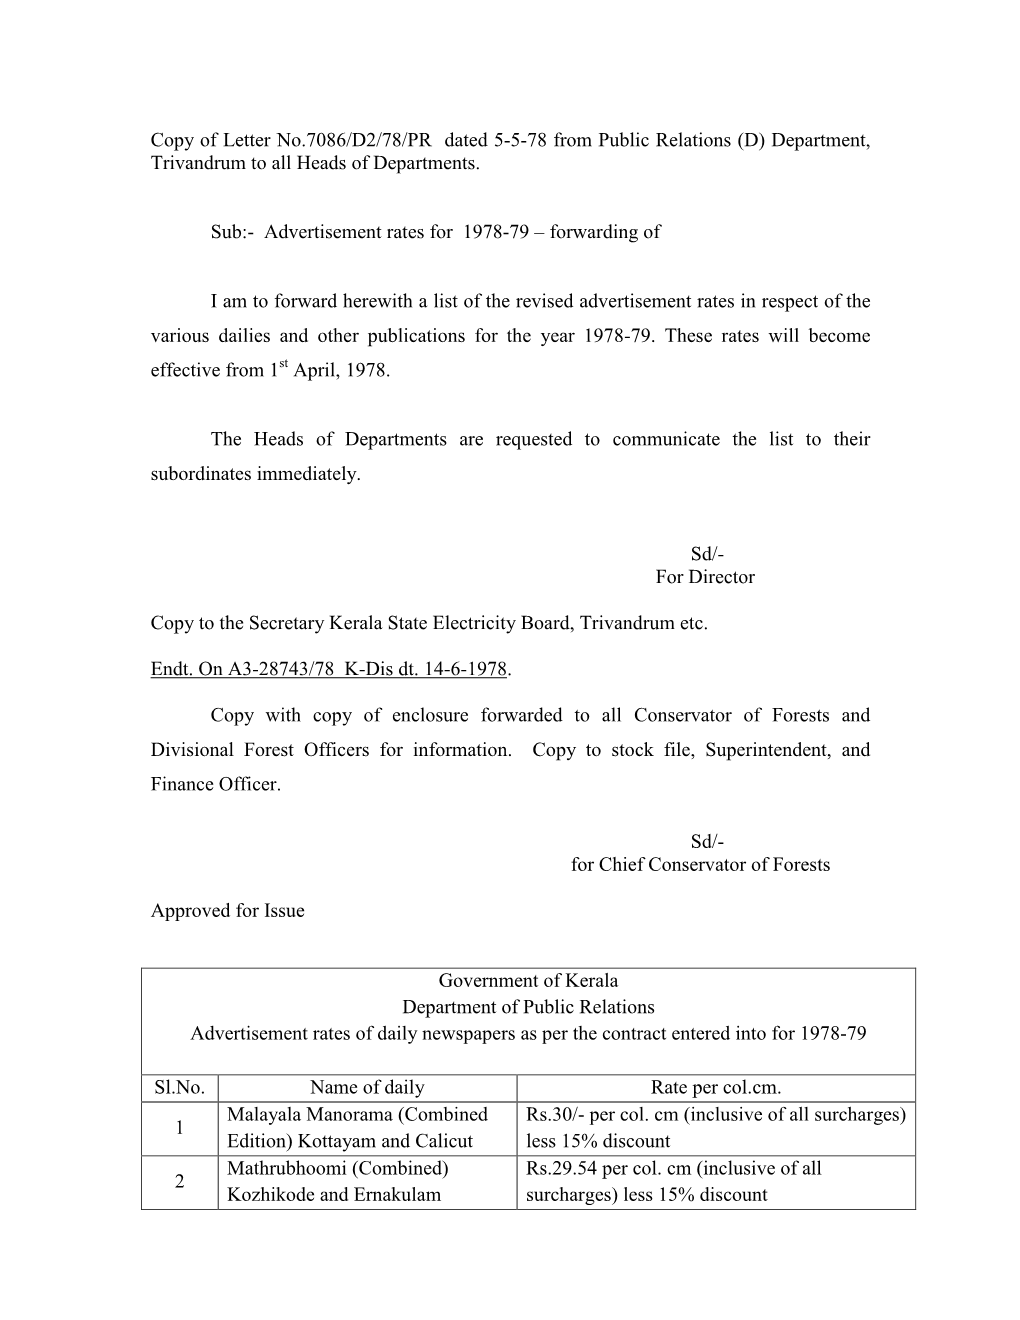 Copy of Letter No.7086/D2/78/PR Dated 5-5-78 from Public Relations (D) Department, Trivandrum to All Heads of Departments